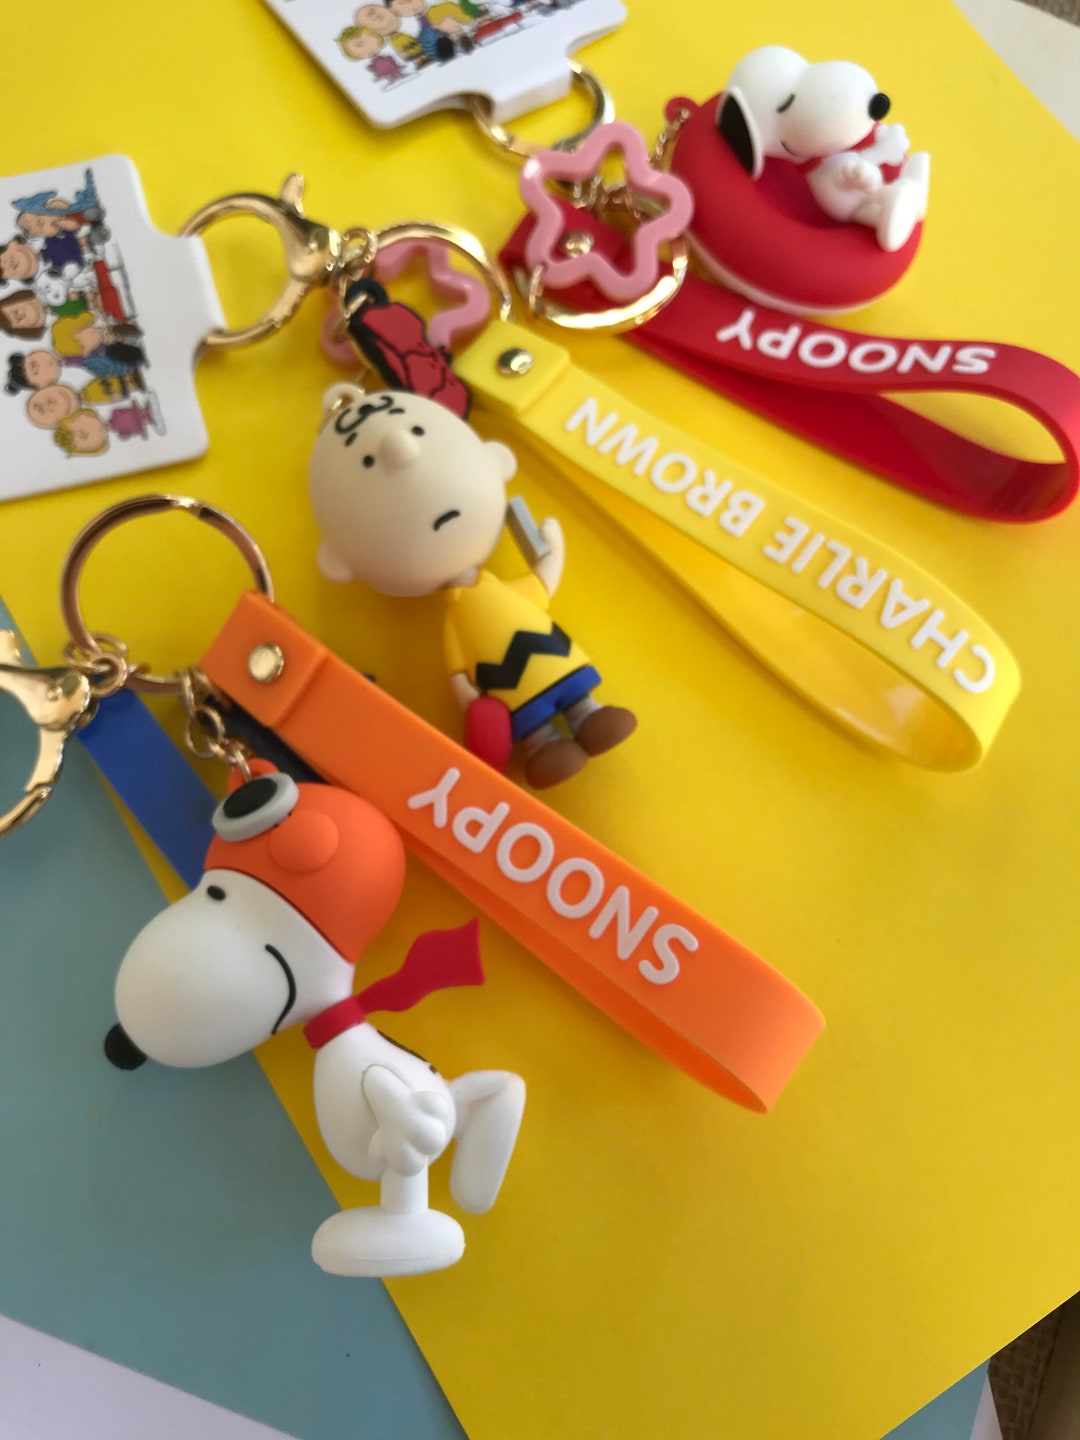 Peanuts PVC Key Chain With Embossed Wrist Strap and Bell - Snoopy Flyi